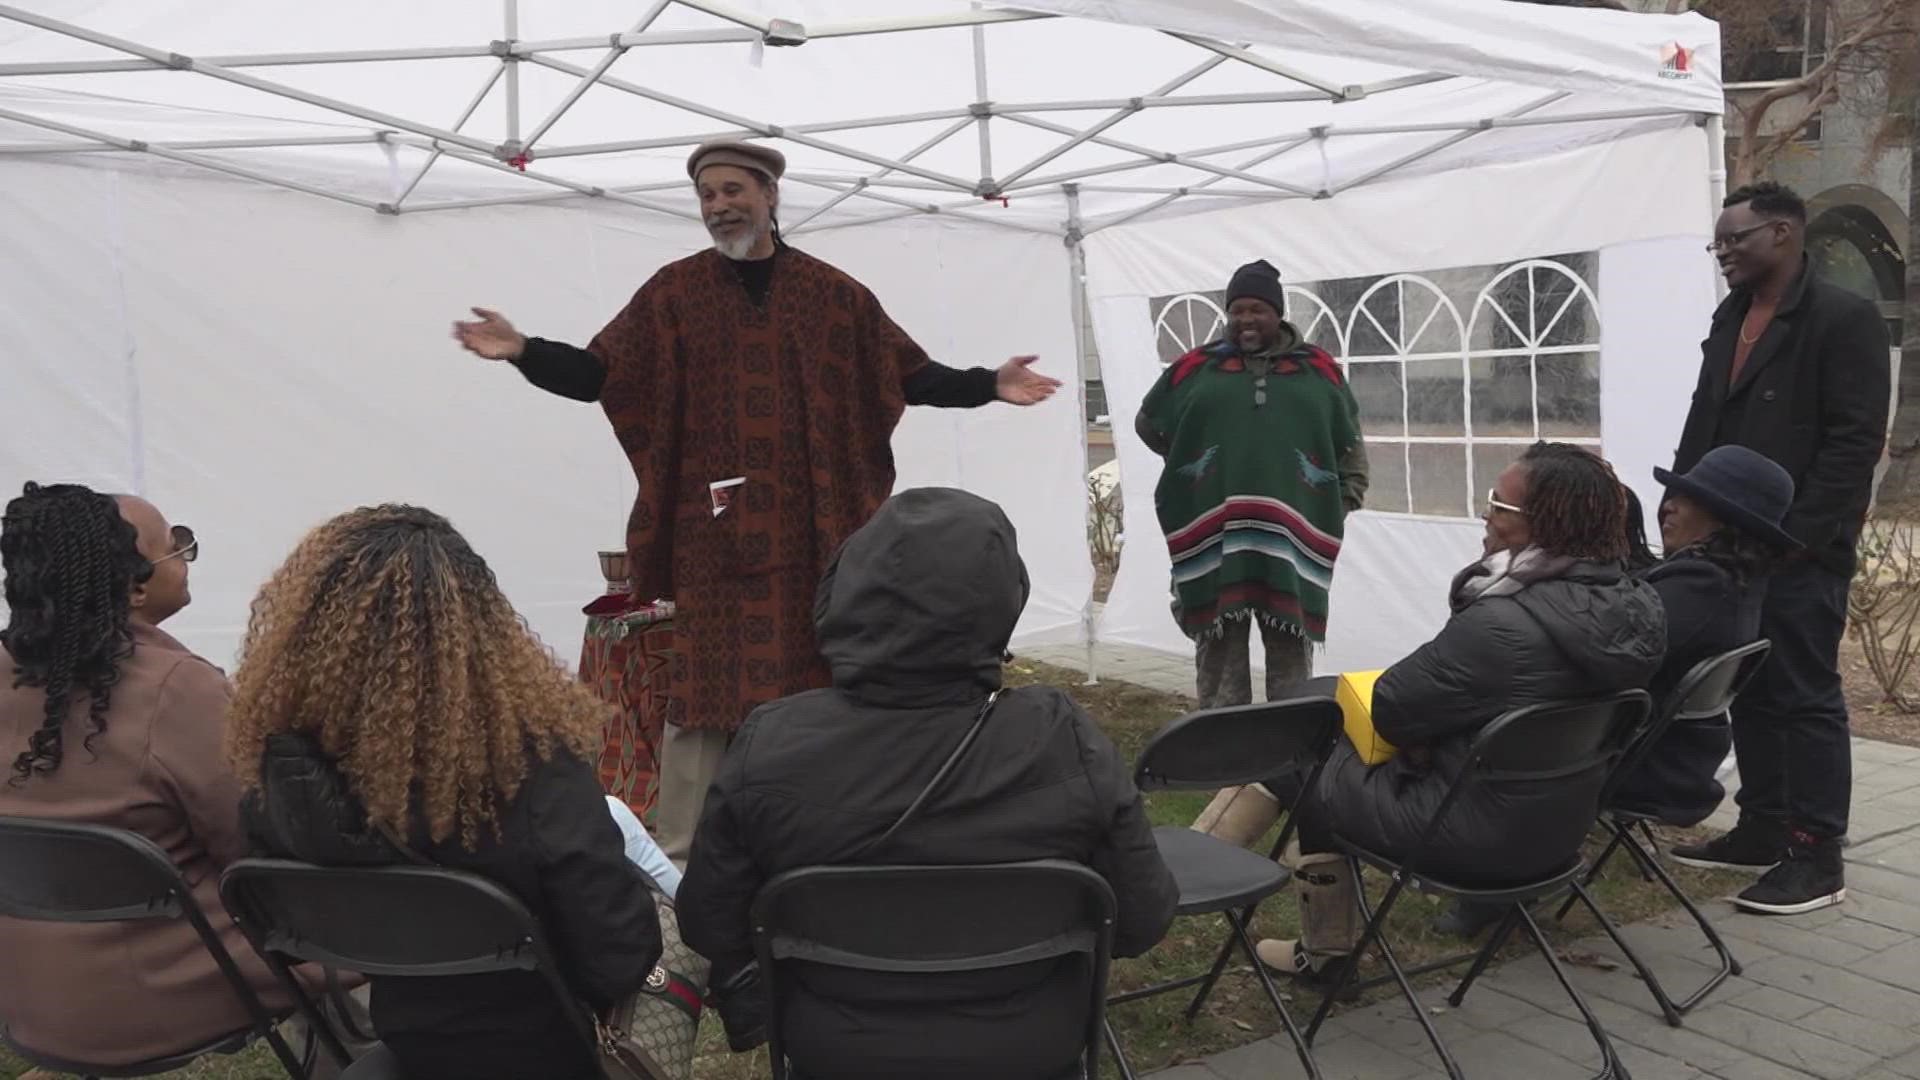 Sacramento residents came together to light the first candle on the first day of the 7-day Kwanzaa celebration.